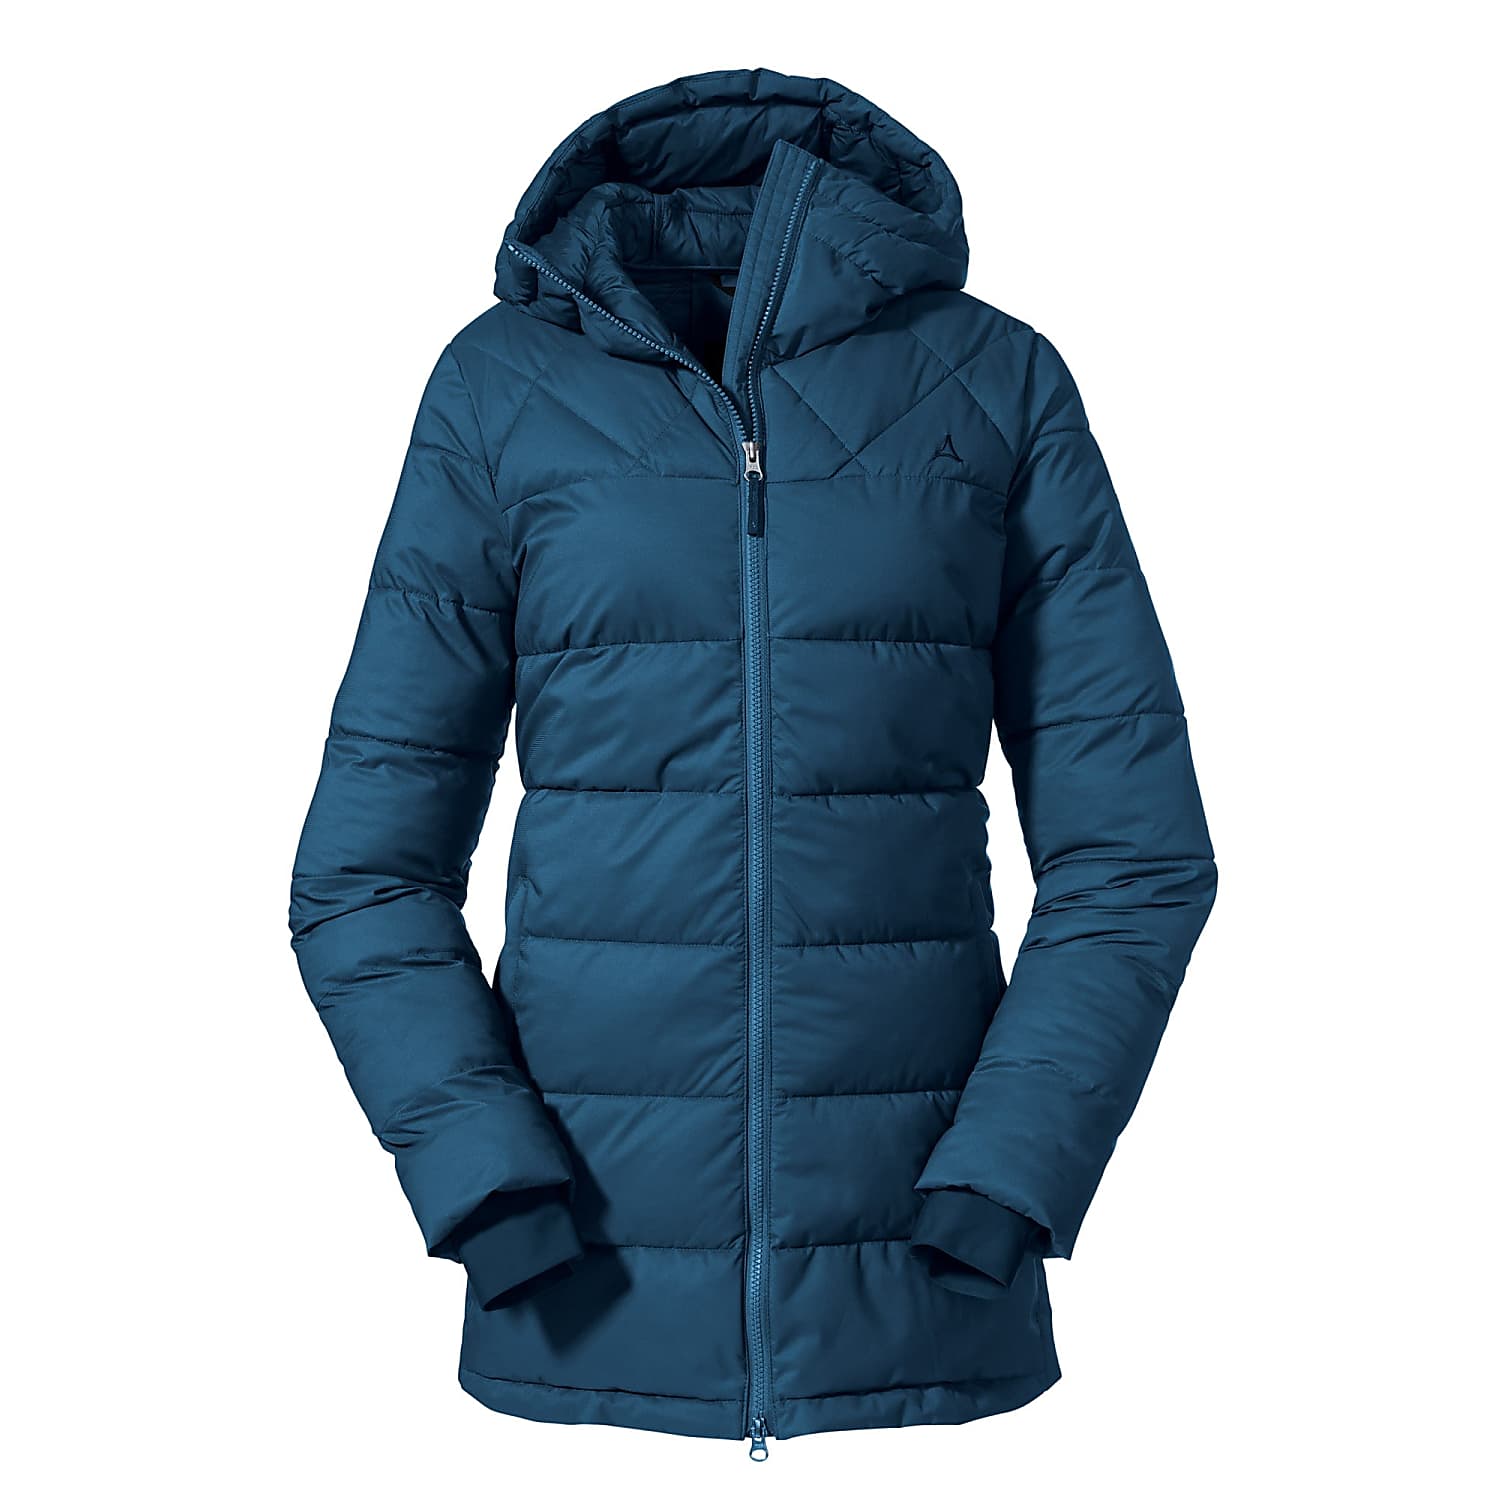 shipping cheap Moonlit INSULATED Ocean BOSTON, W Fast Schoeffel - PARKA and